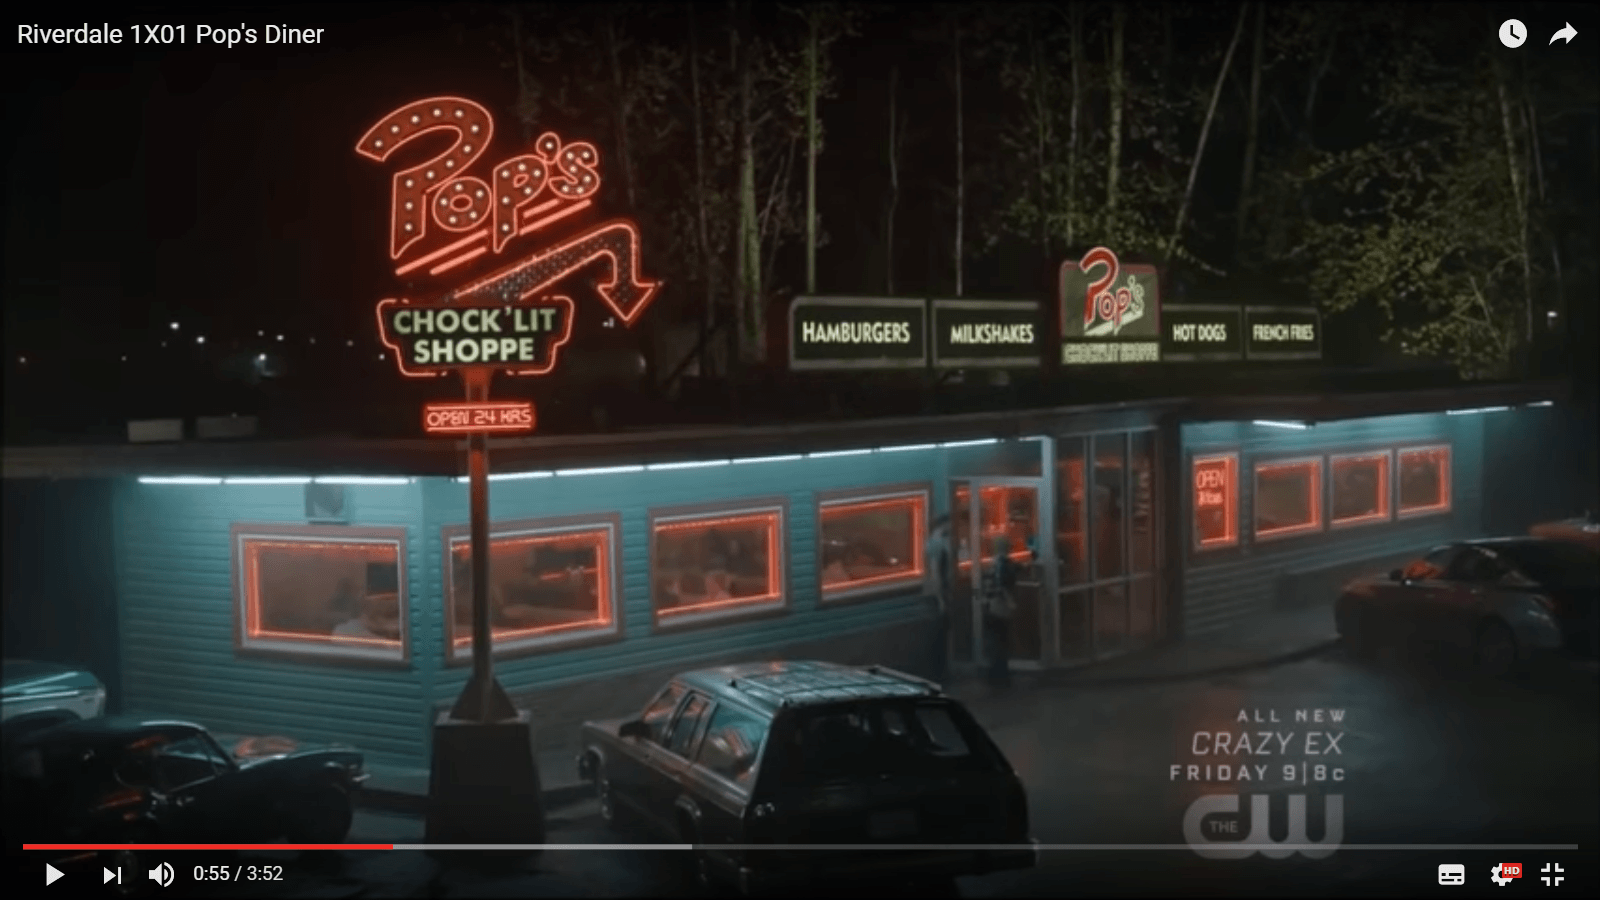 A POP CULTURE ADDICT'S GUIDE TO LIFE: Riverdale Your